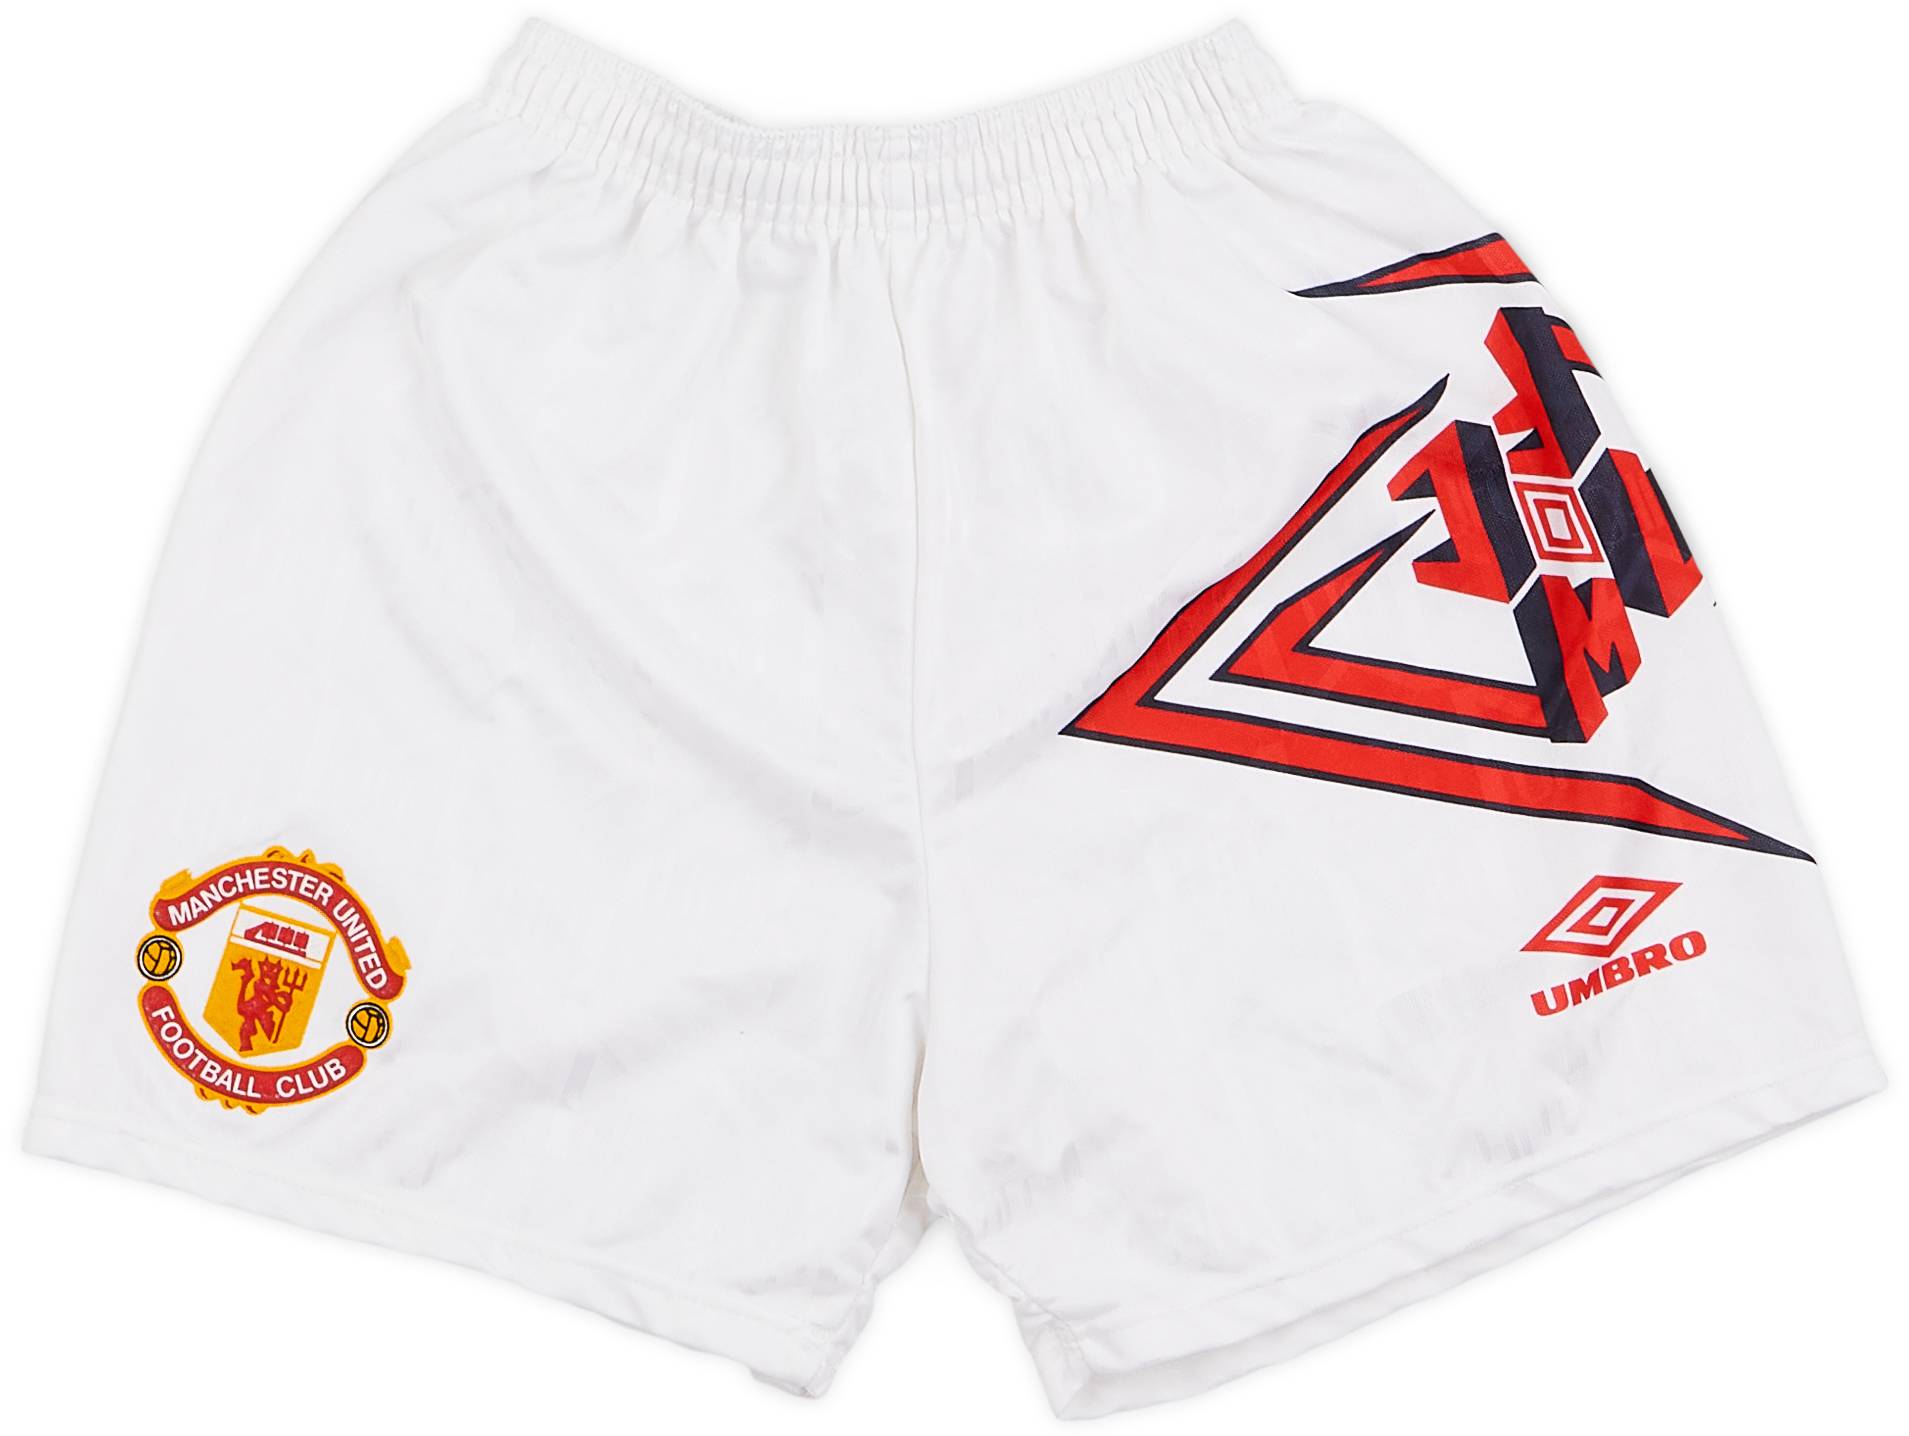 1992-94 Manchester United Home Shorts - 9/10 - (S)